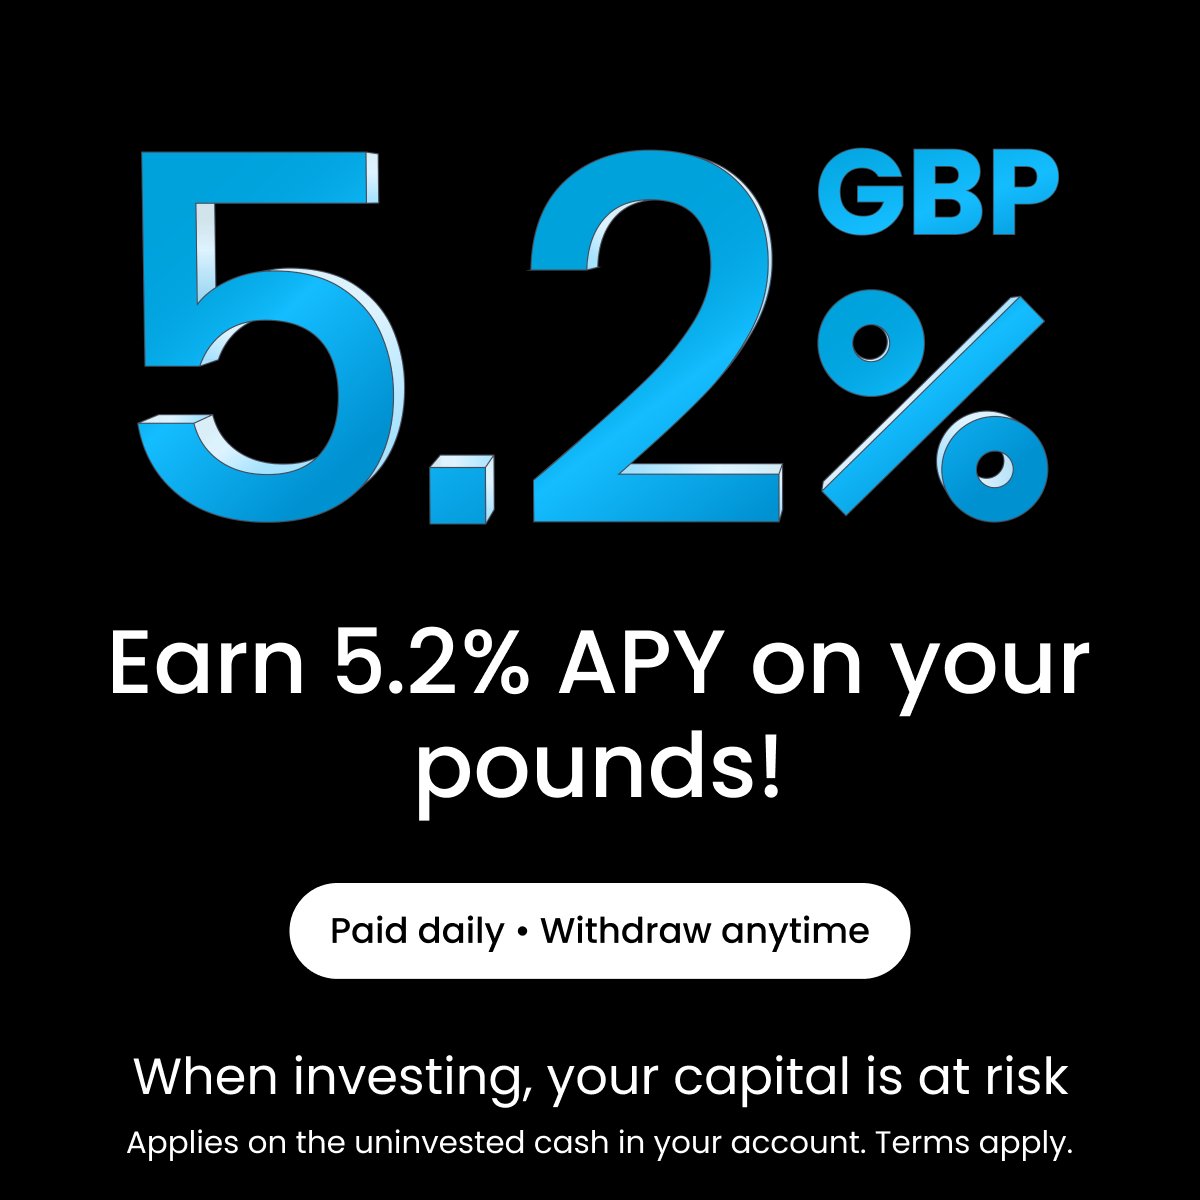 📈 We did it again! Enjoy EVEN HIGHER interest rates on your uninvested cash! ✅ Earn 5.2% APY on GBP! ✅ Get paid daily ✅ Withdraw anytime Applies on the uninvested cash in your account. Terms apply.